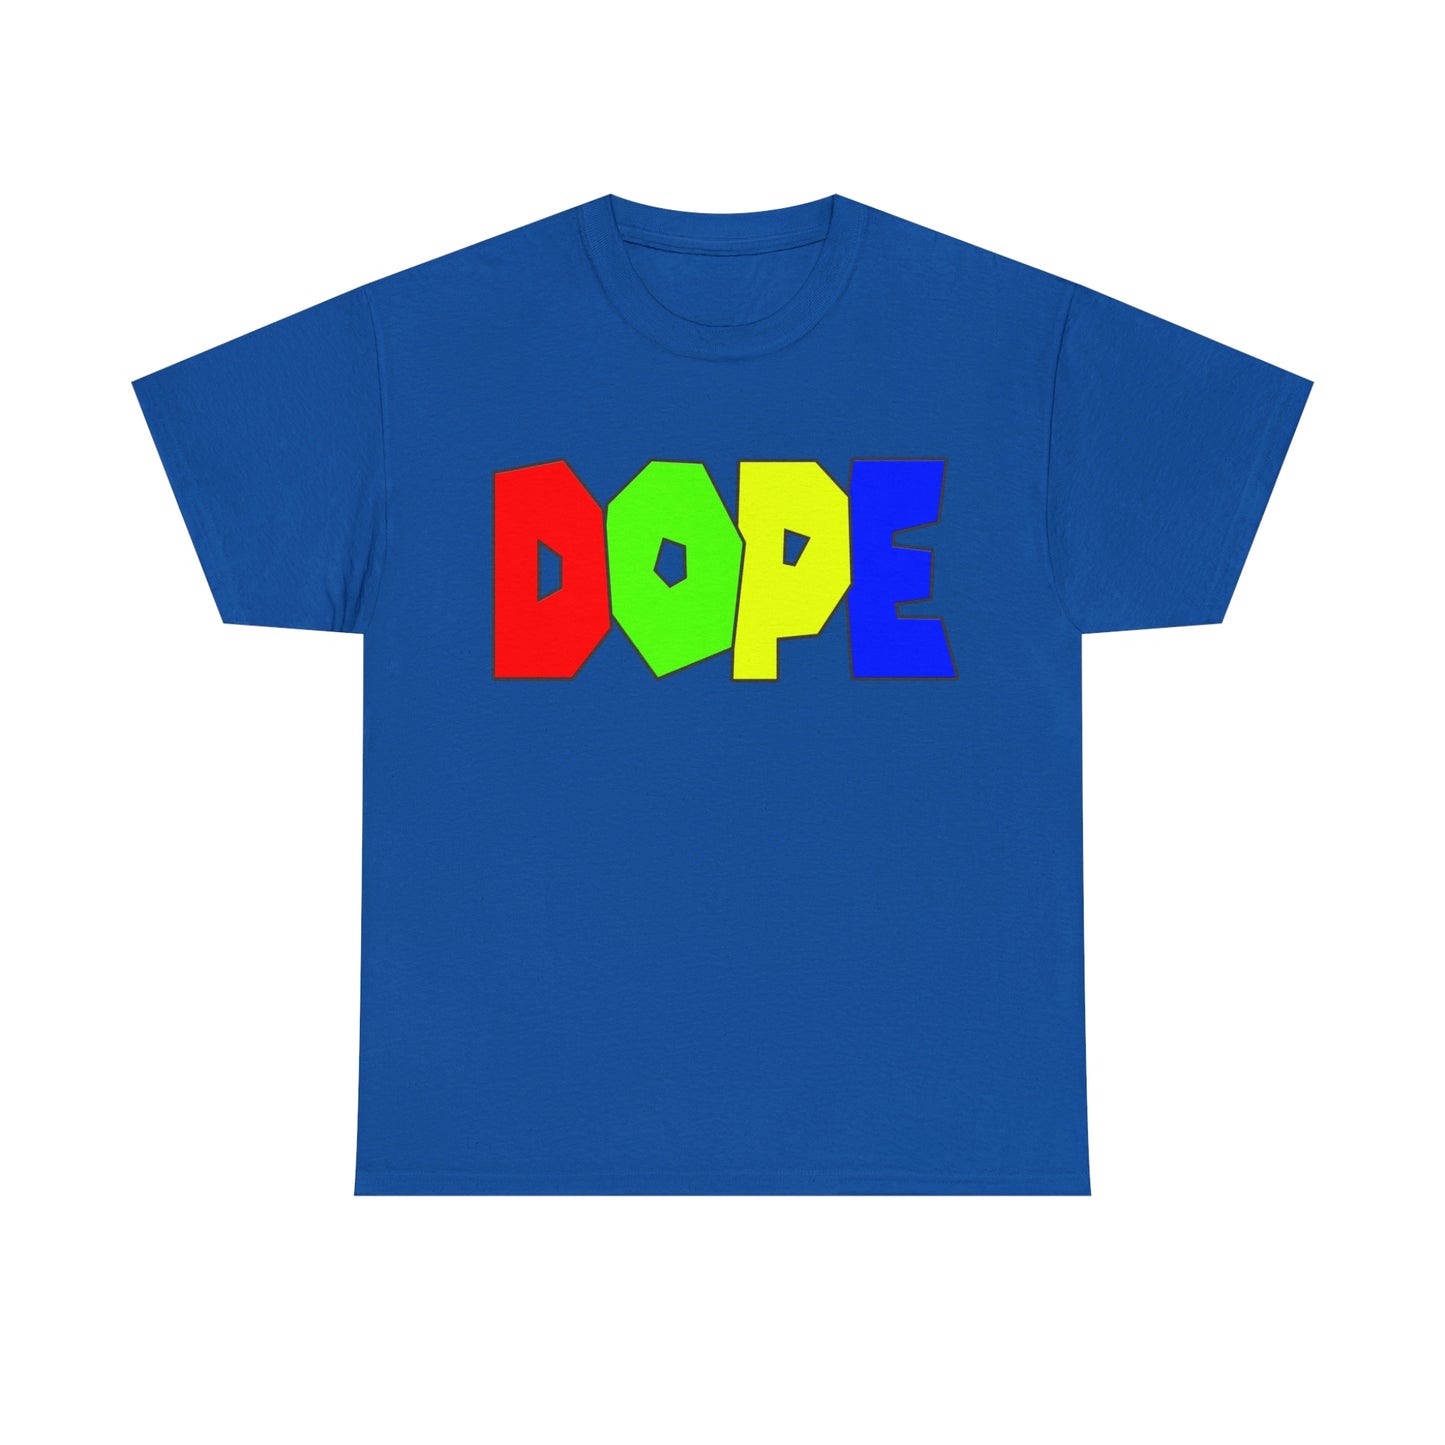 DOPE Shirt - Up to 5X